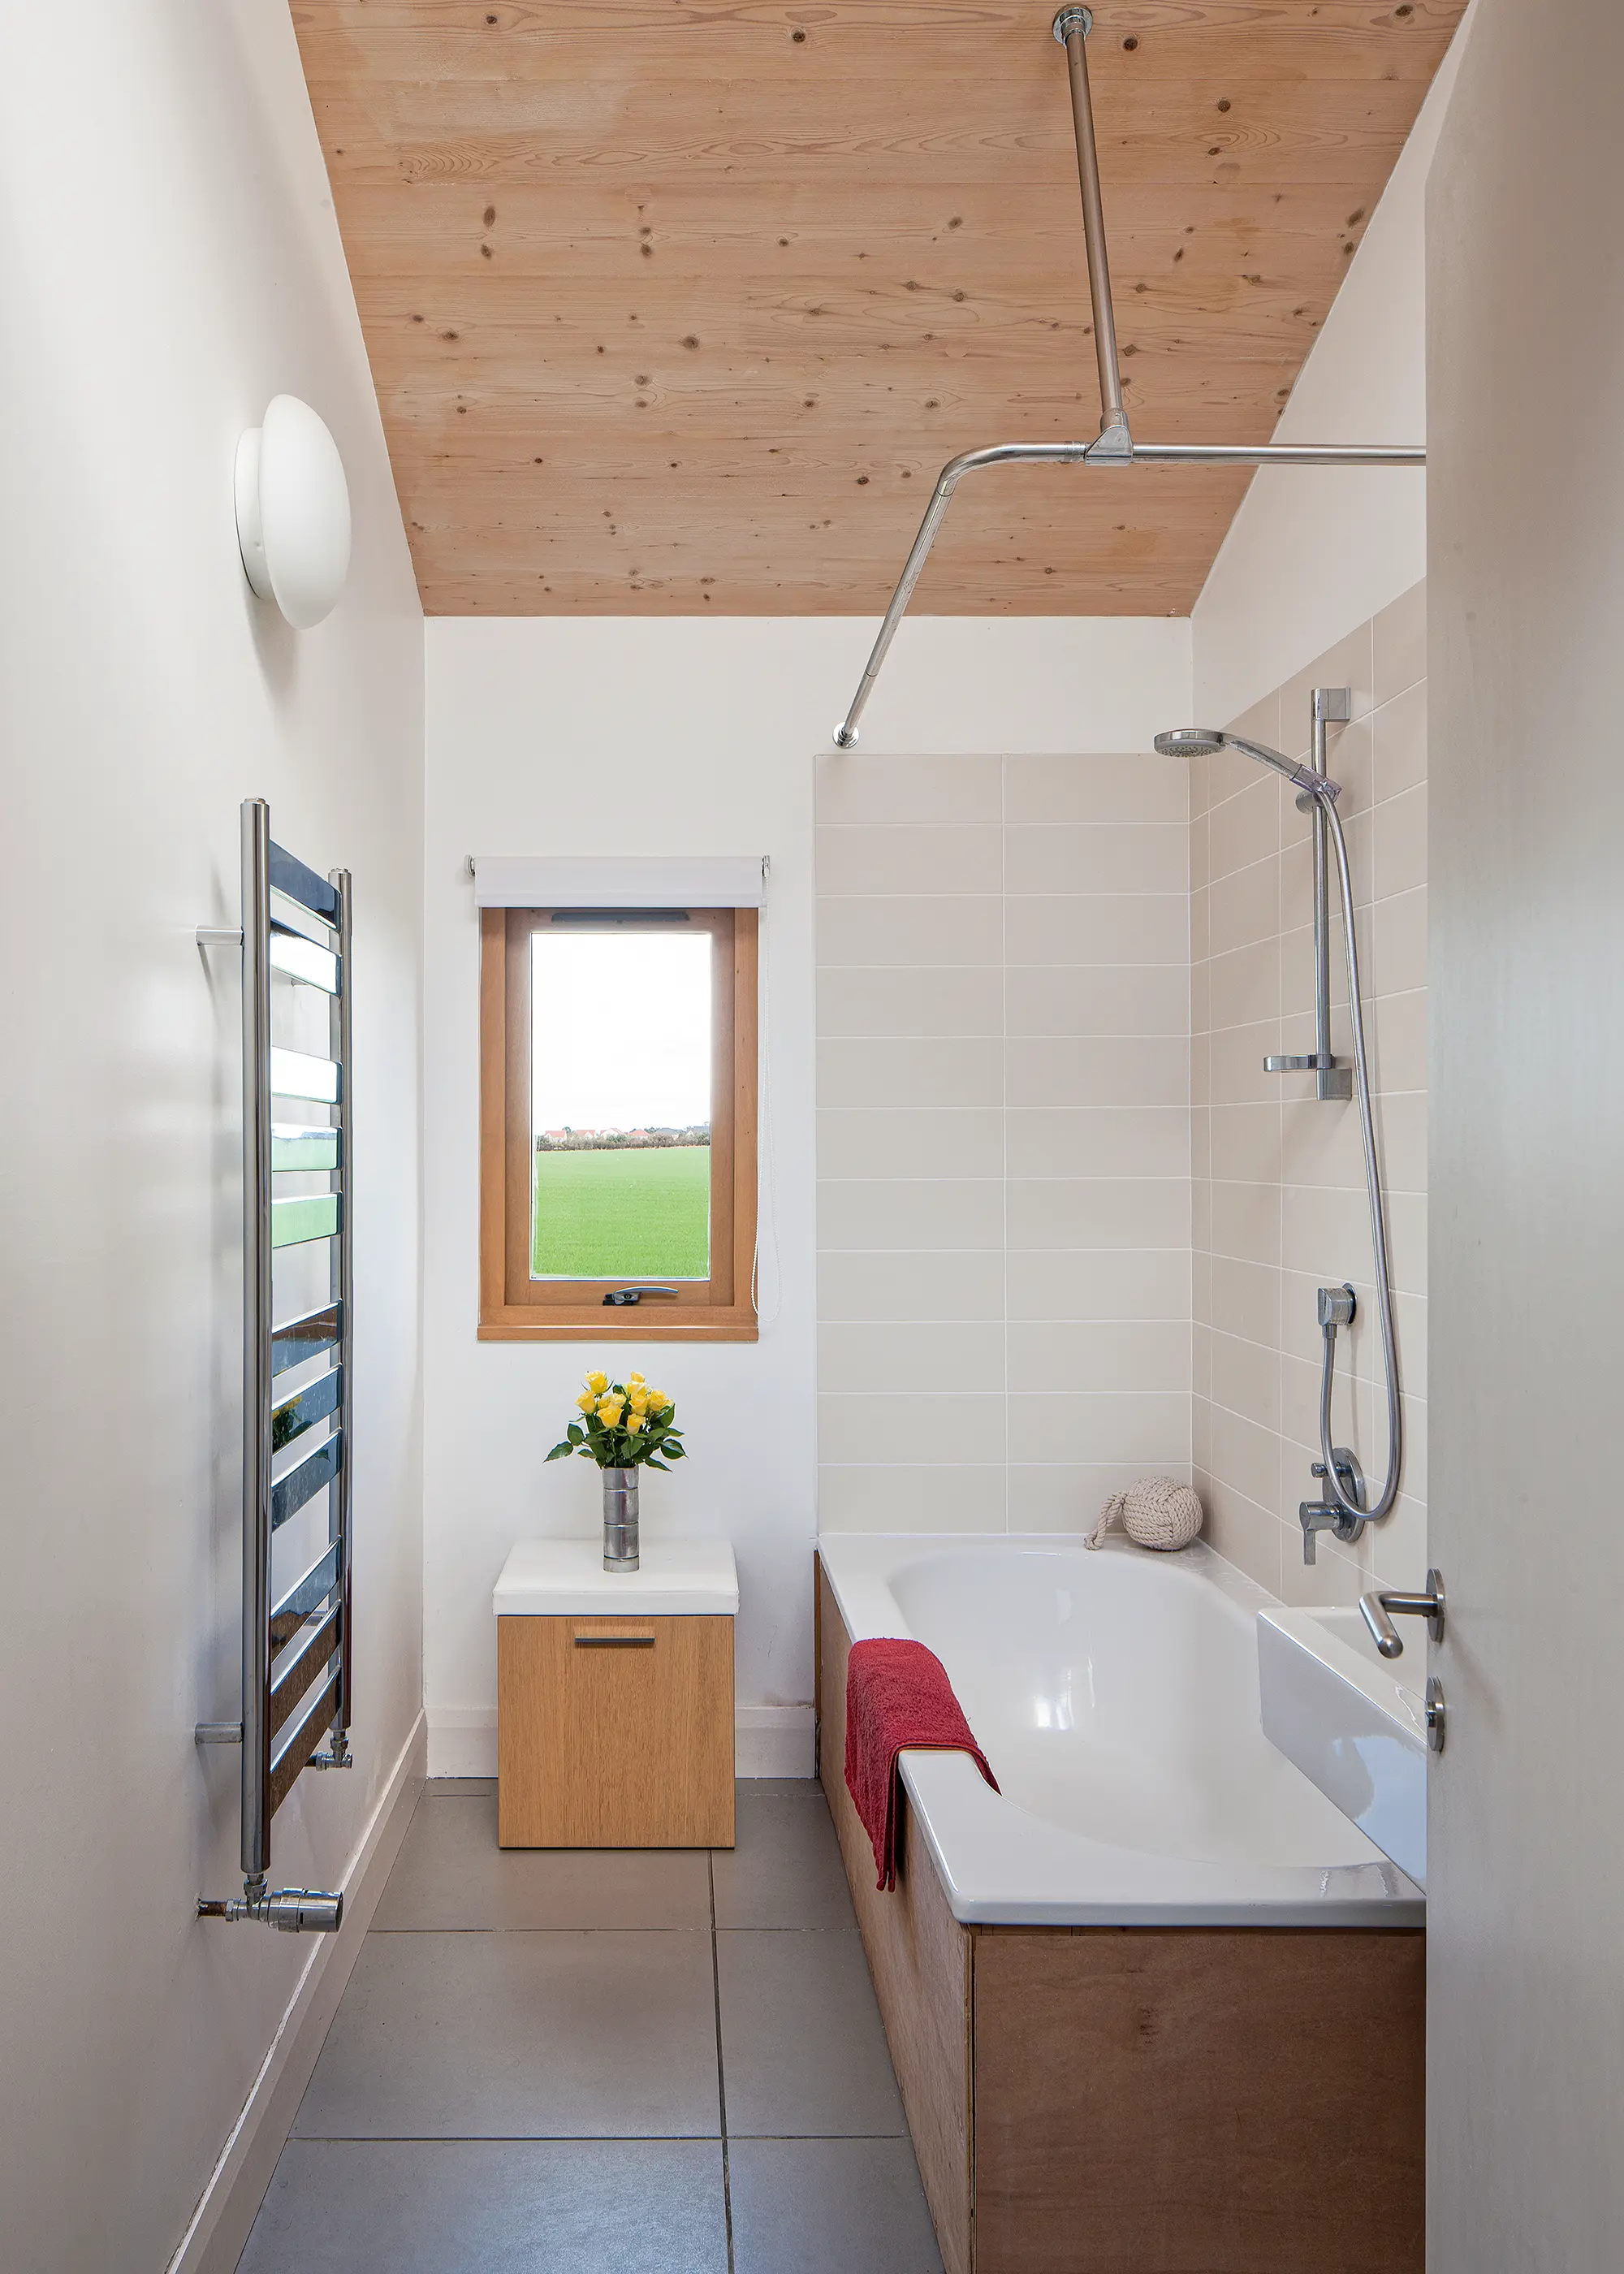 Bathroom with exposed timber ceiling